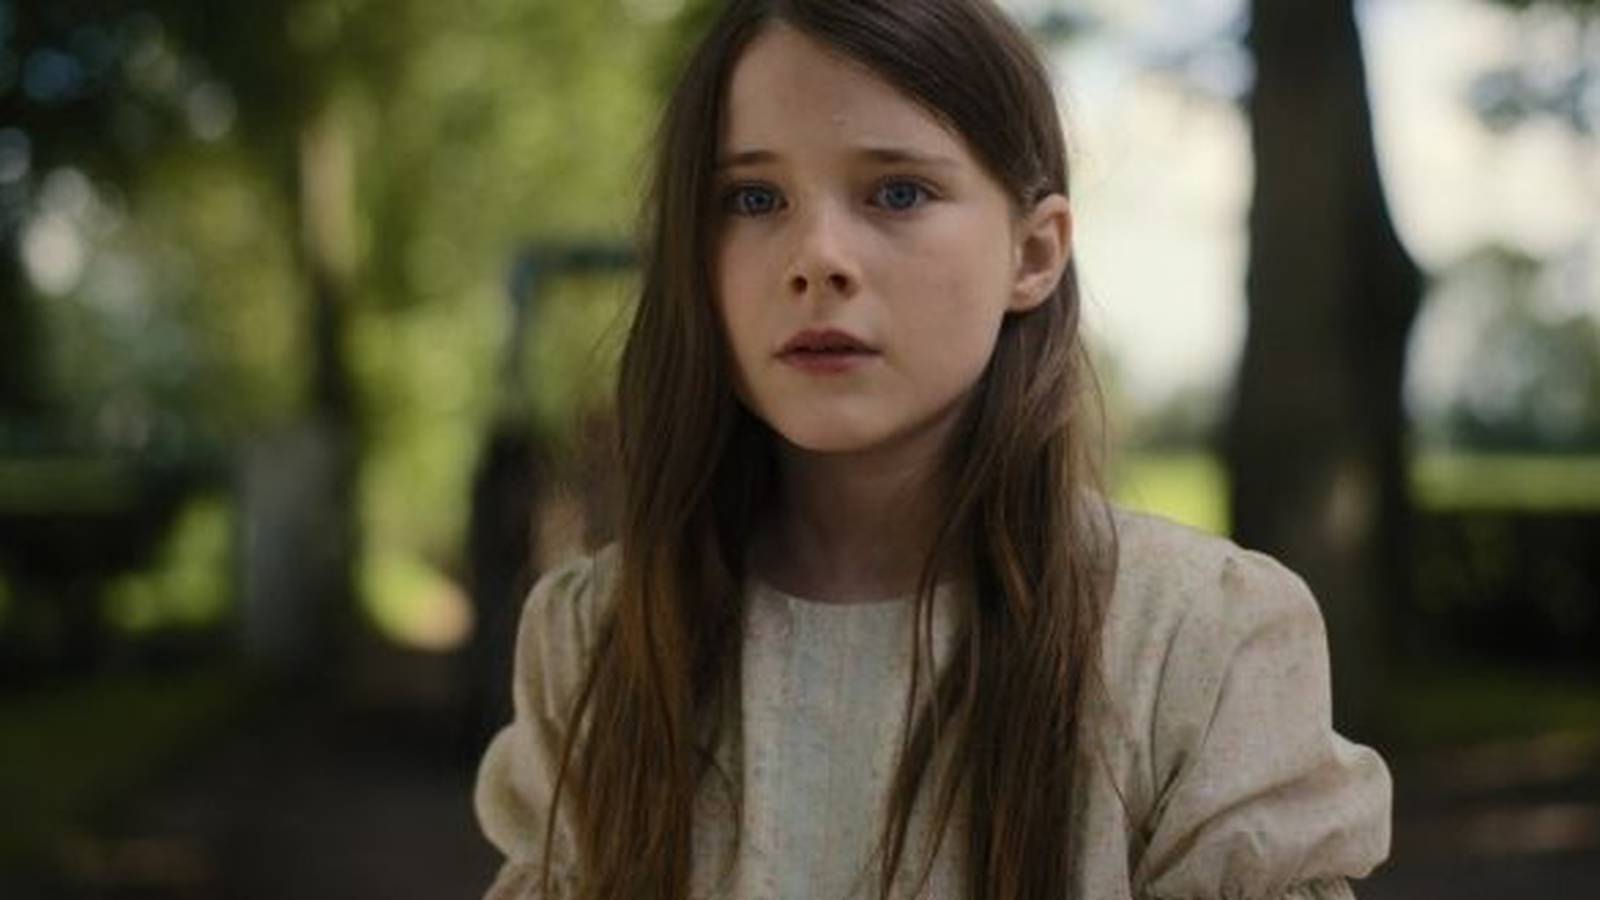 STAR: Cáit – a quiet, apprehensive child – is played by the superbly talented Catherine Clinch